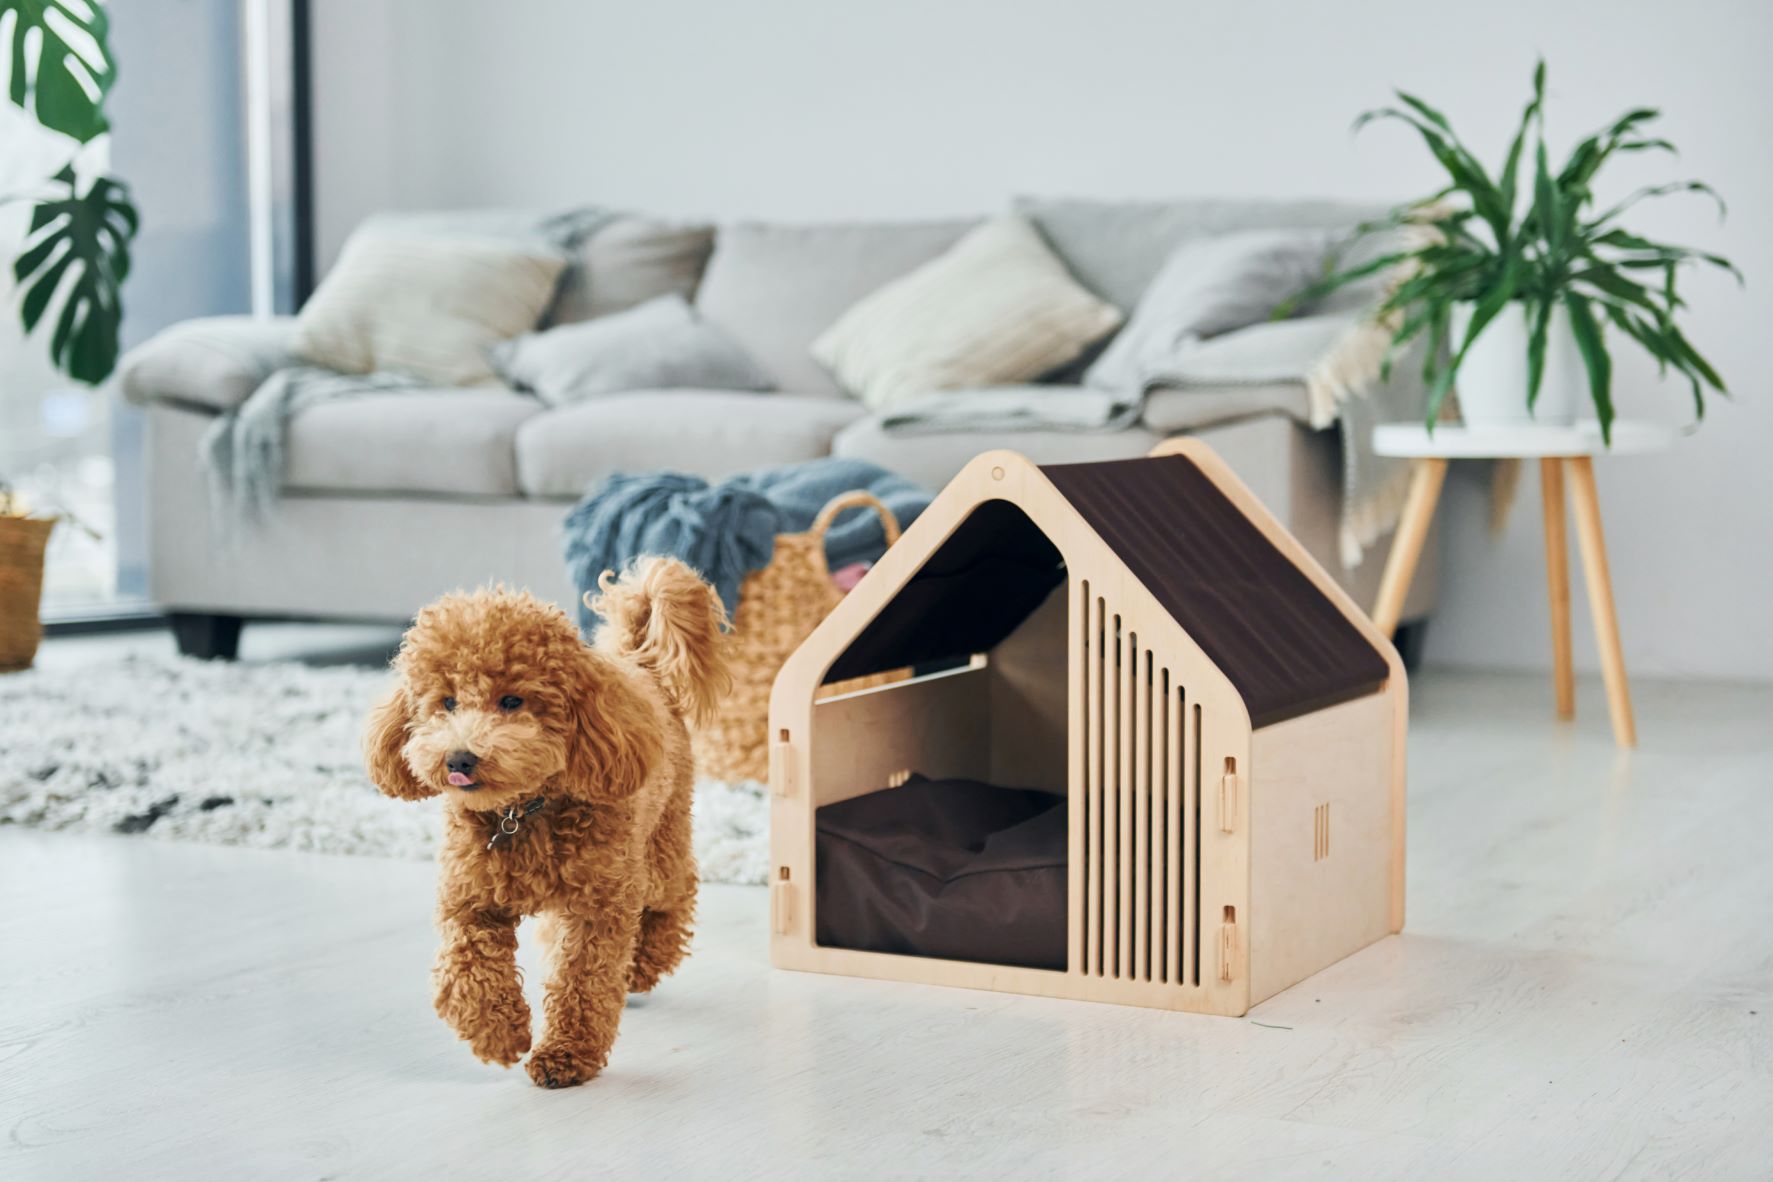 cute-little-poodle-puppy-with-pet-booth-indoors-modern-domestic-room-animal-house.jpg